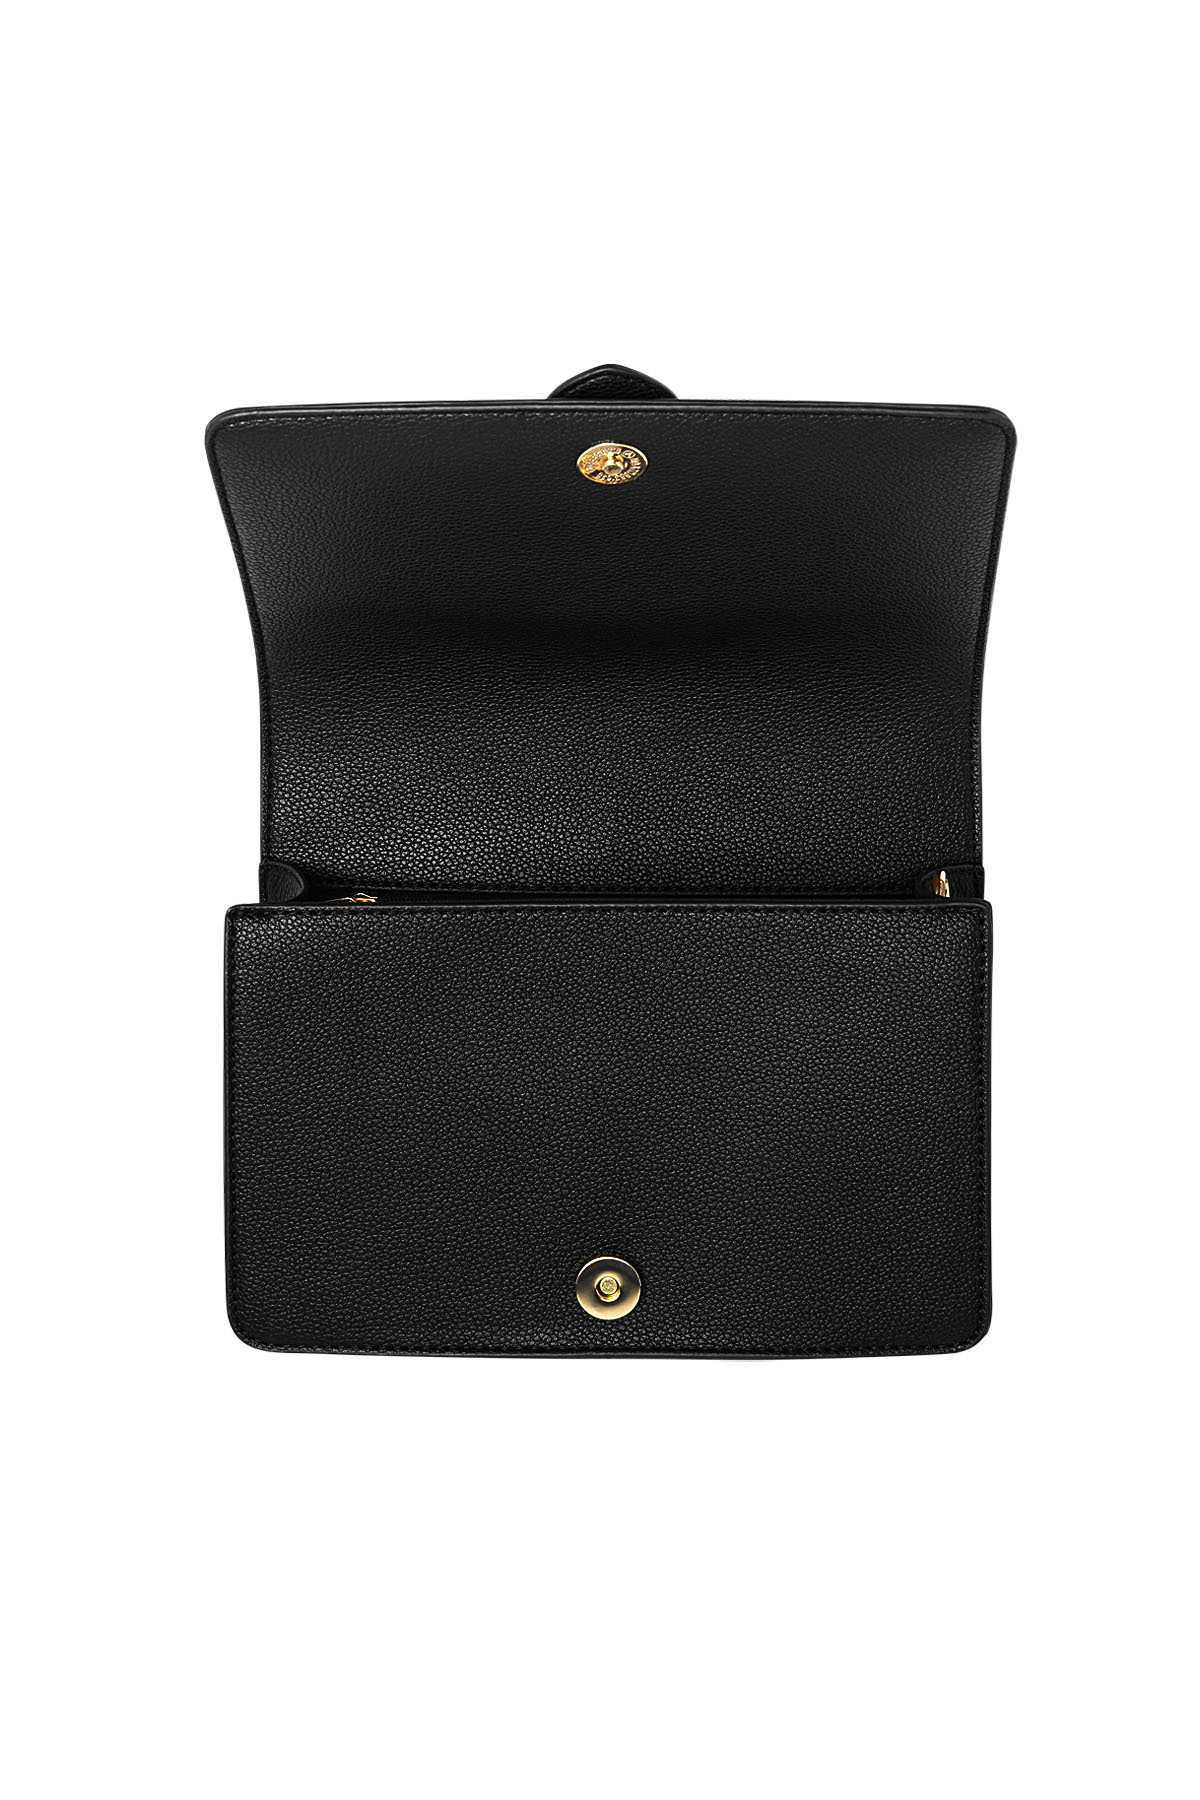 Bag buckle classy - black Picture5